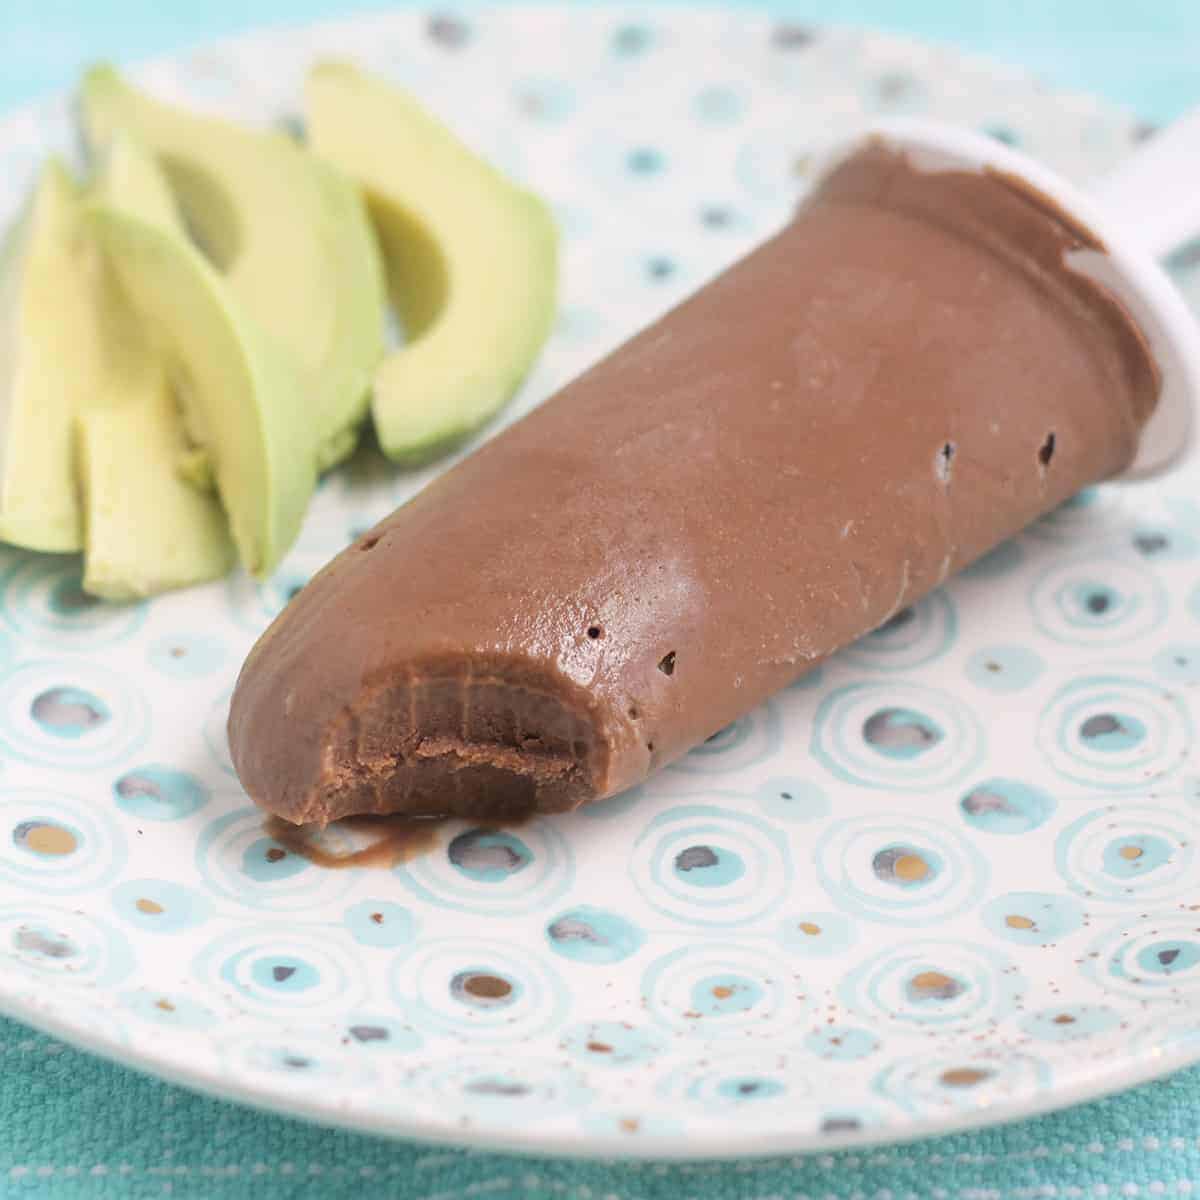 pudding-pops-on-plate-with-avocado_featured